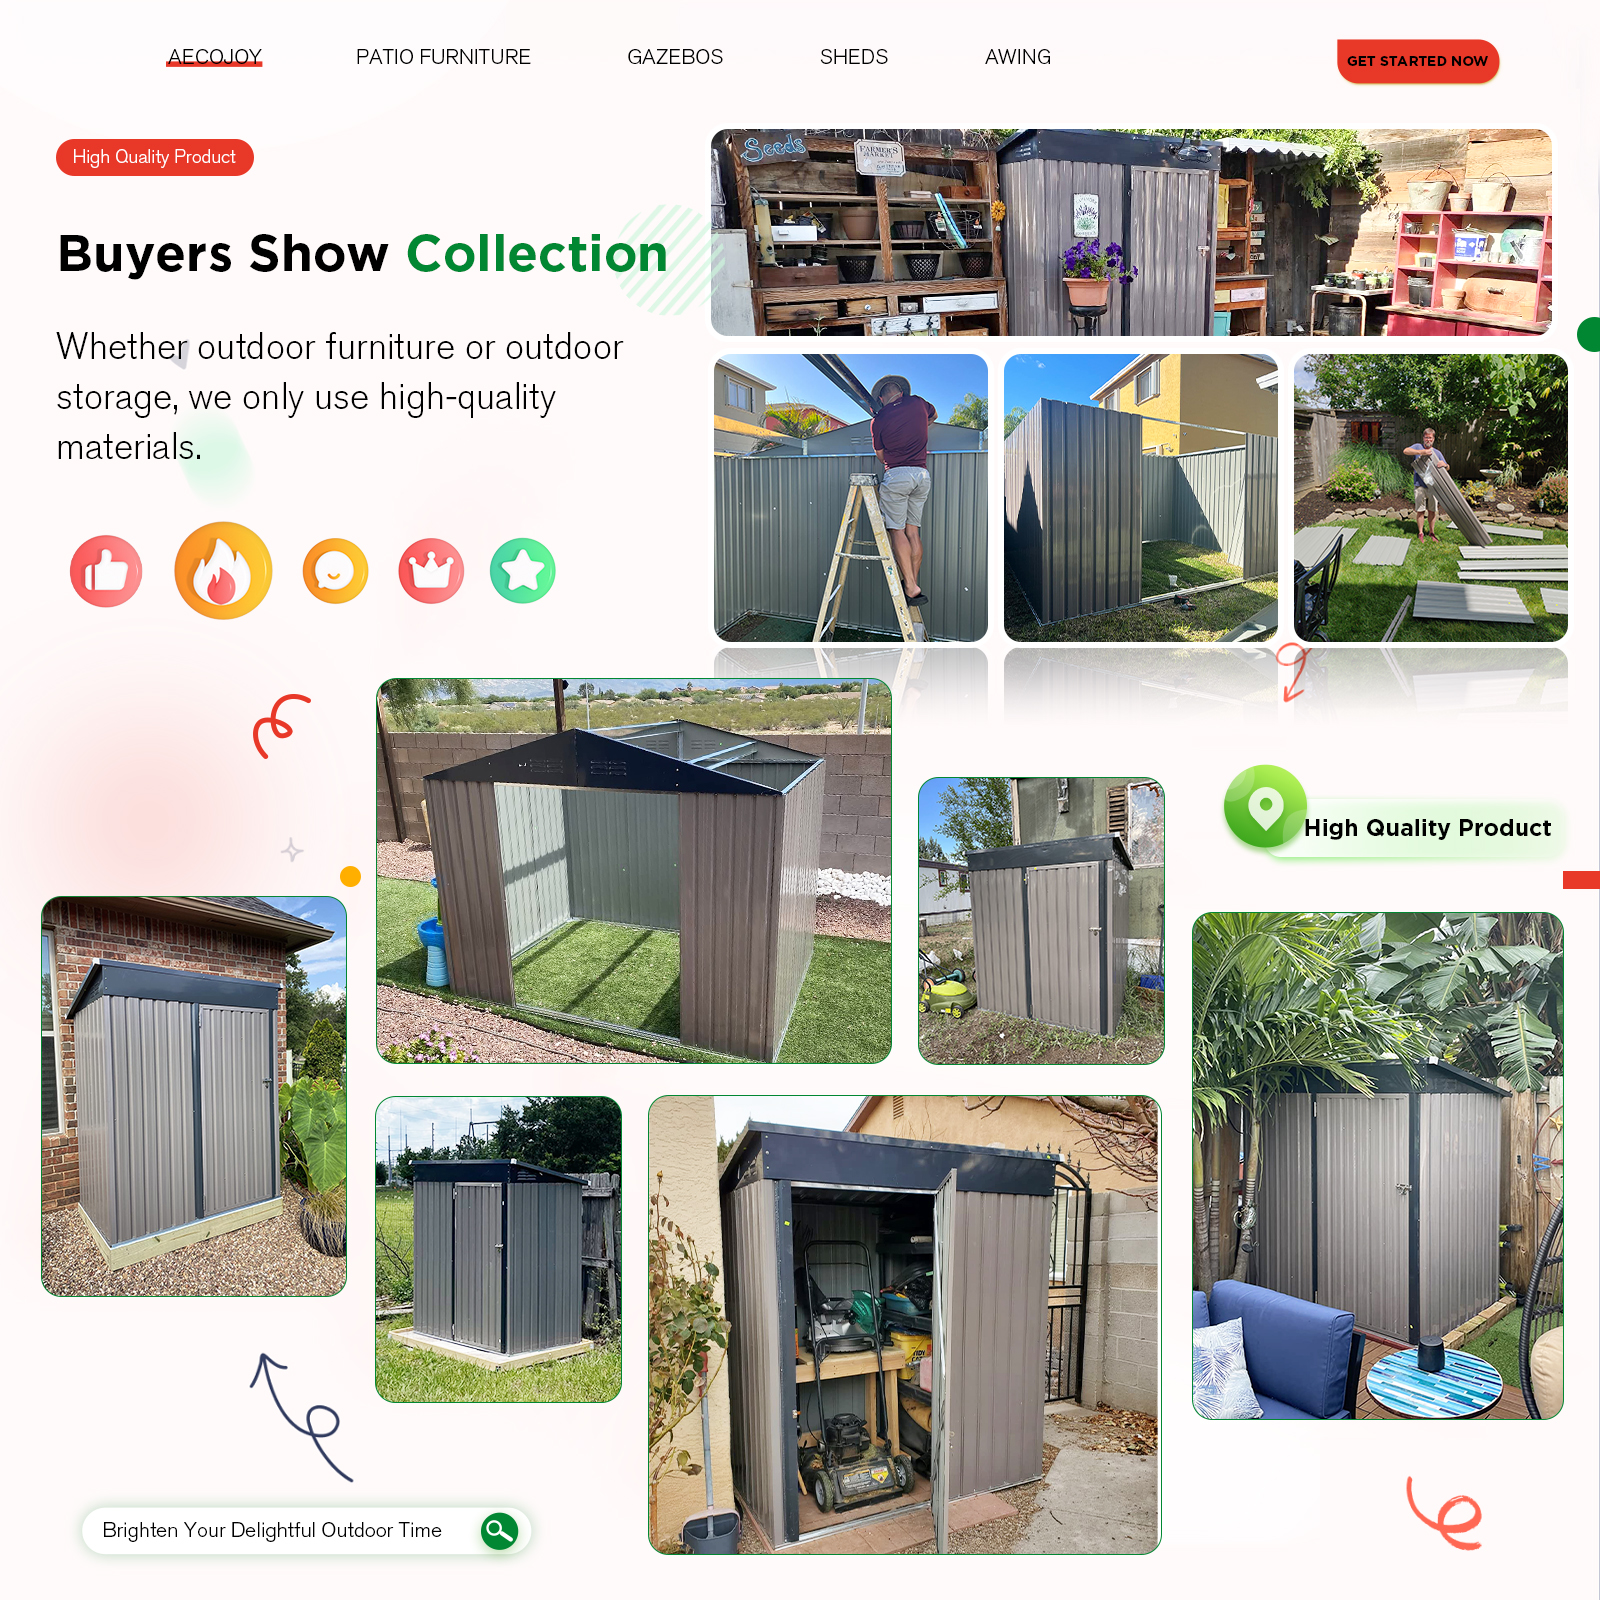 AECOJOY 6 x 4 ft. Outdoor Metal Storage Shed with Sliding Door - image 2 of 10